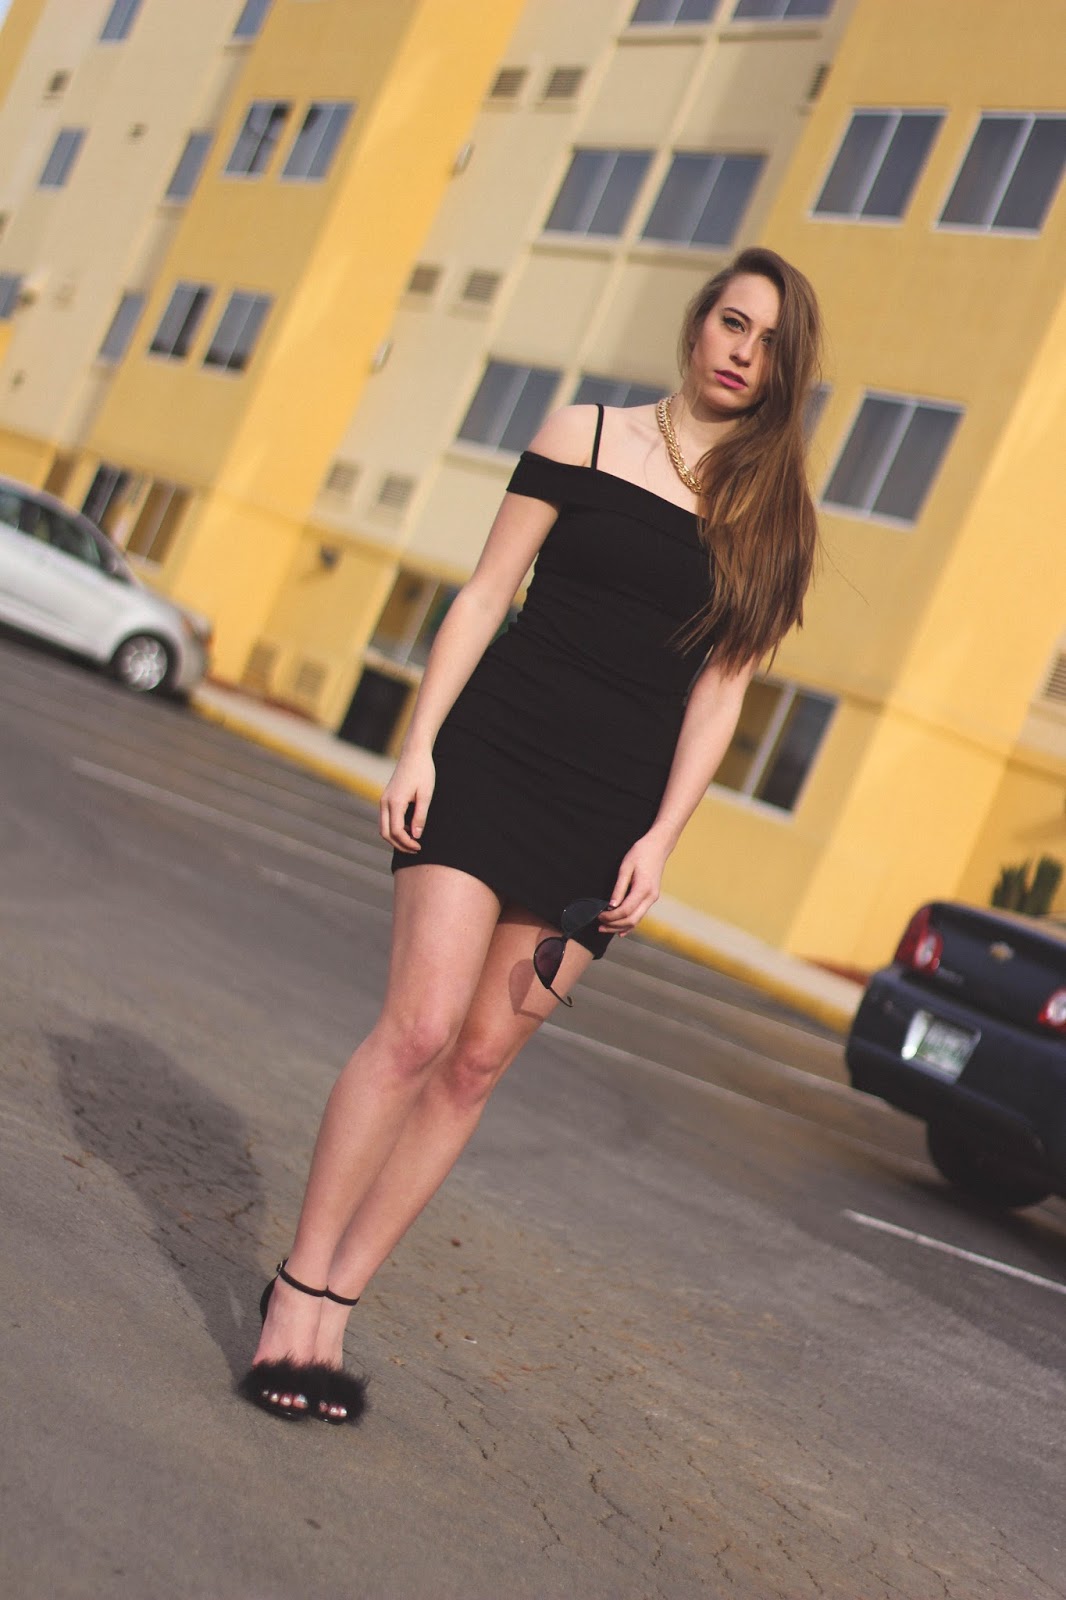 Retro Black and Gold Outfit, Black Off the Shoulder Dress, Lana del Rey Style, Californication, Fashion Blogger